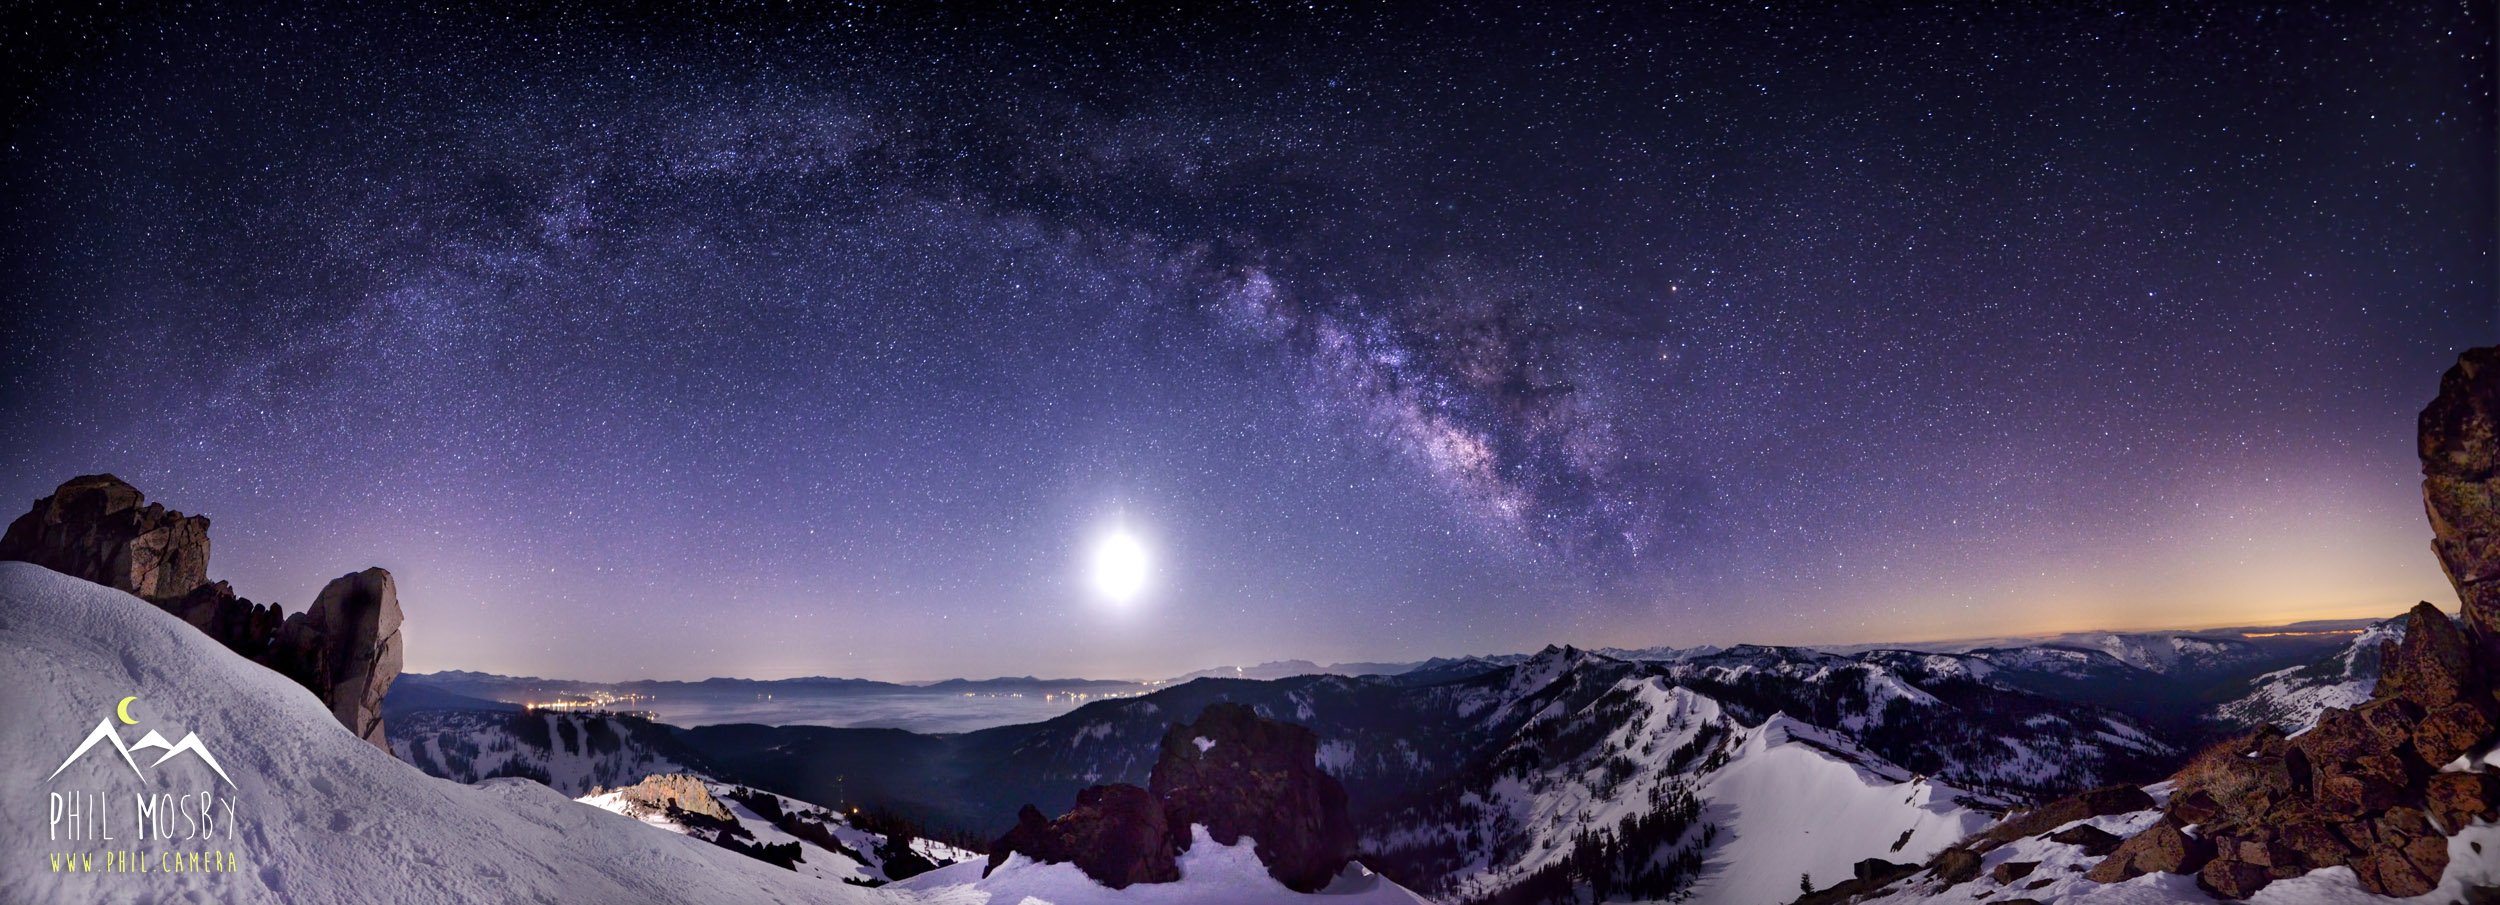 Milky Way over Lake Tahoe, with the